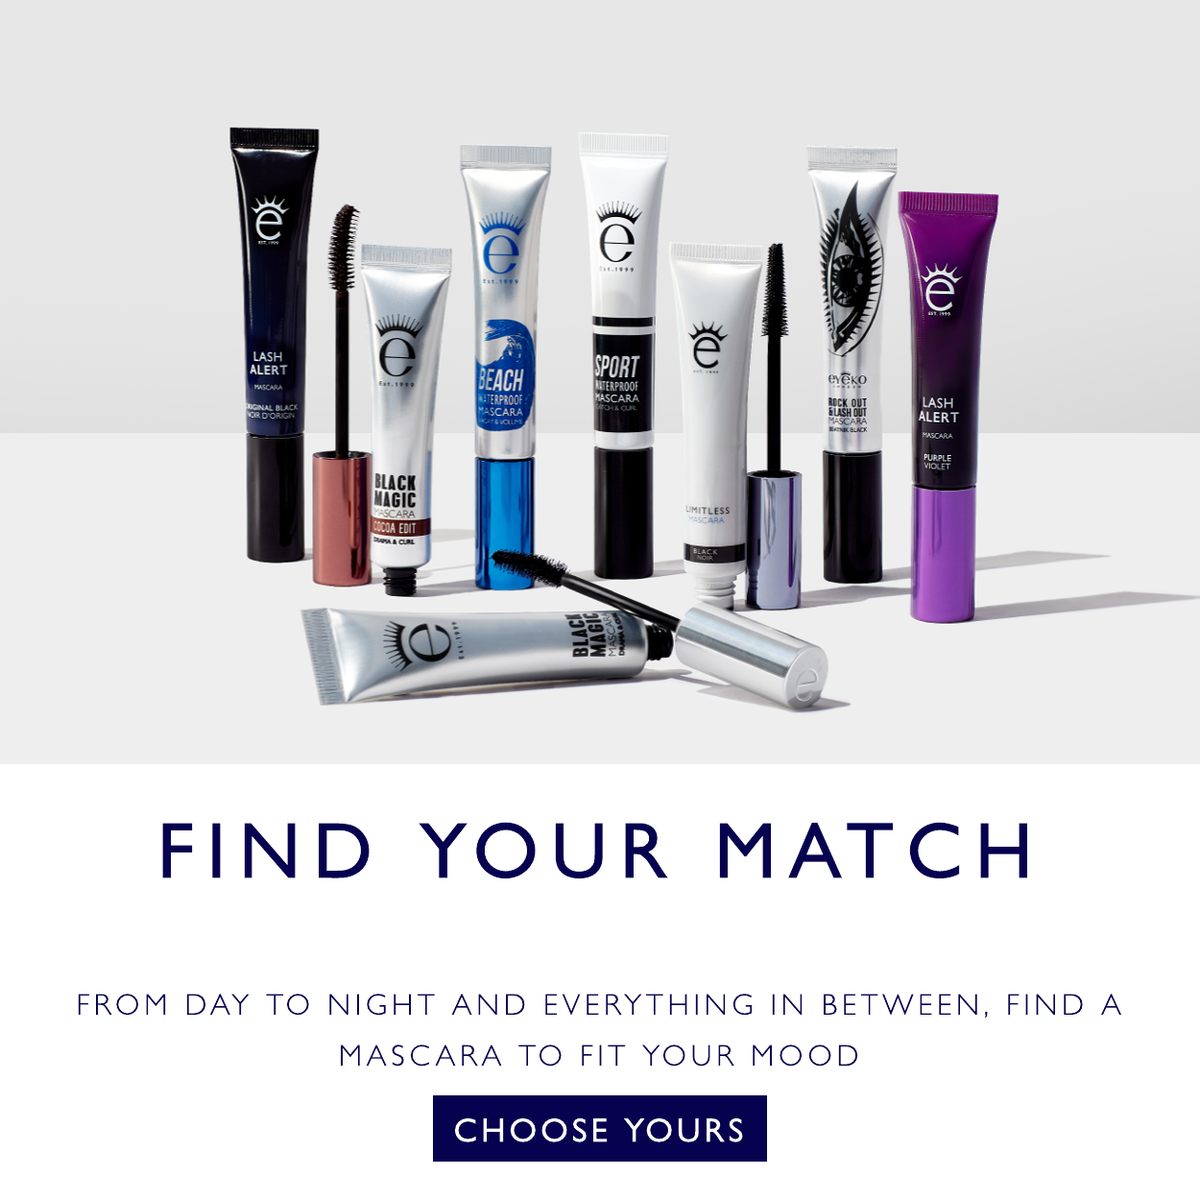 Find Your Match with our Mascaras